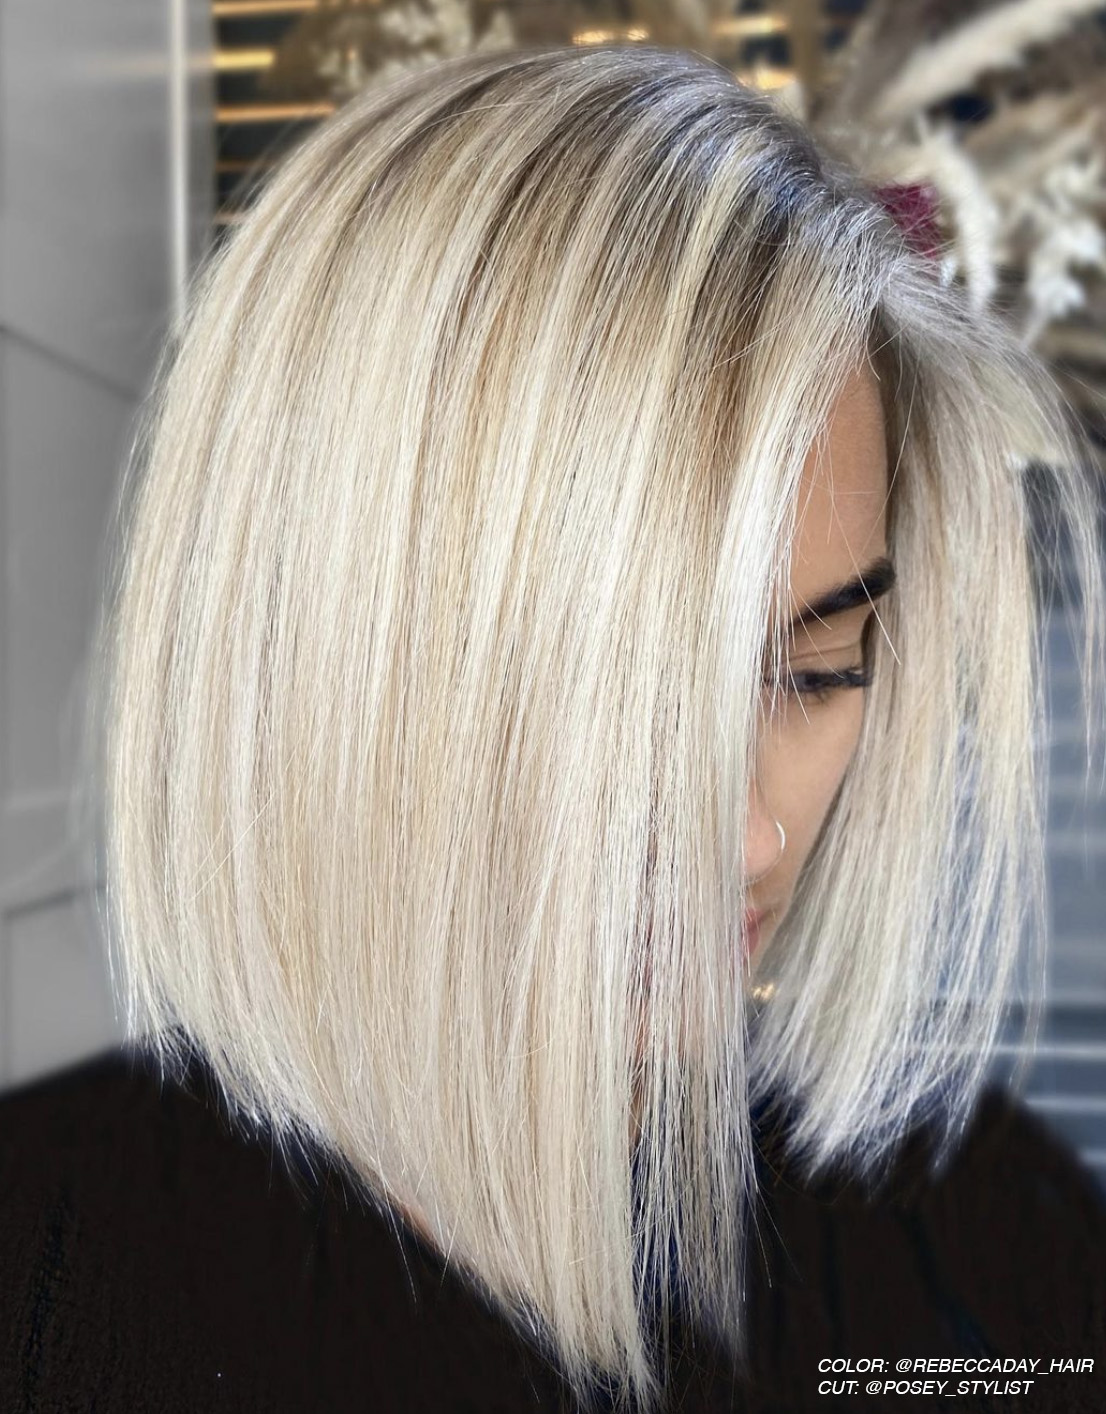 How To Add Volume to Your Blowout - Bangstyle - House of Hair Inspiration